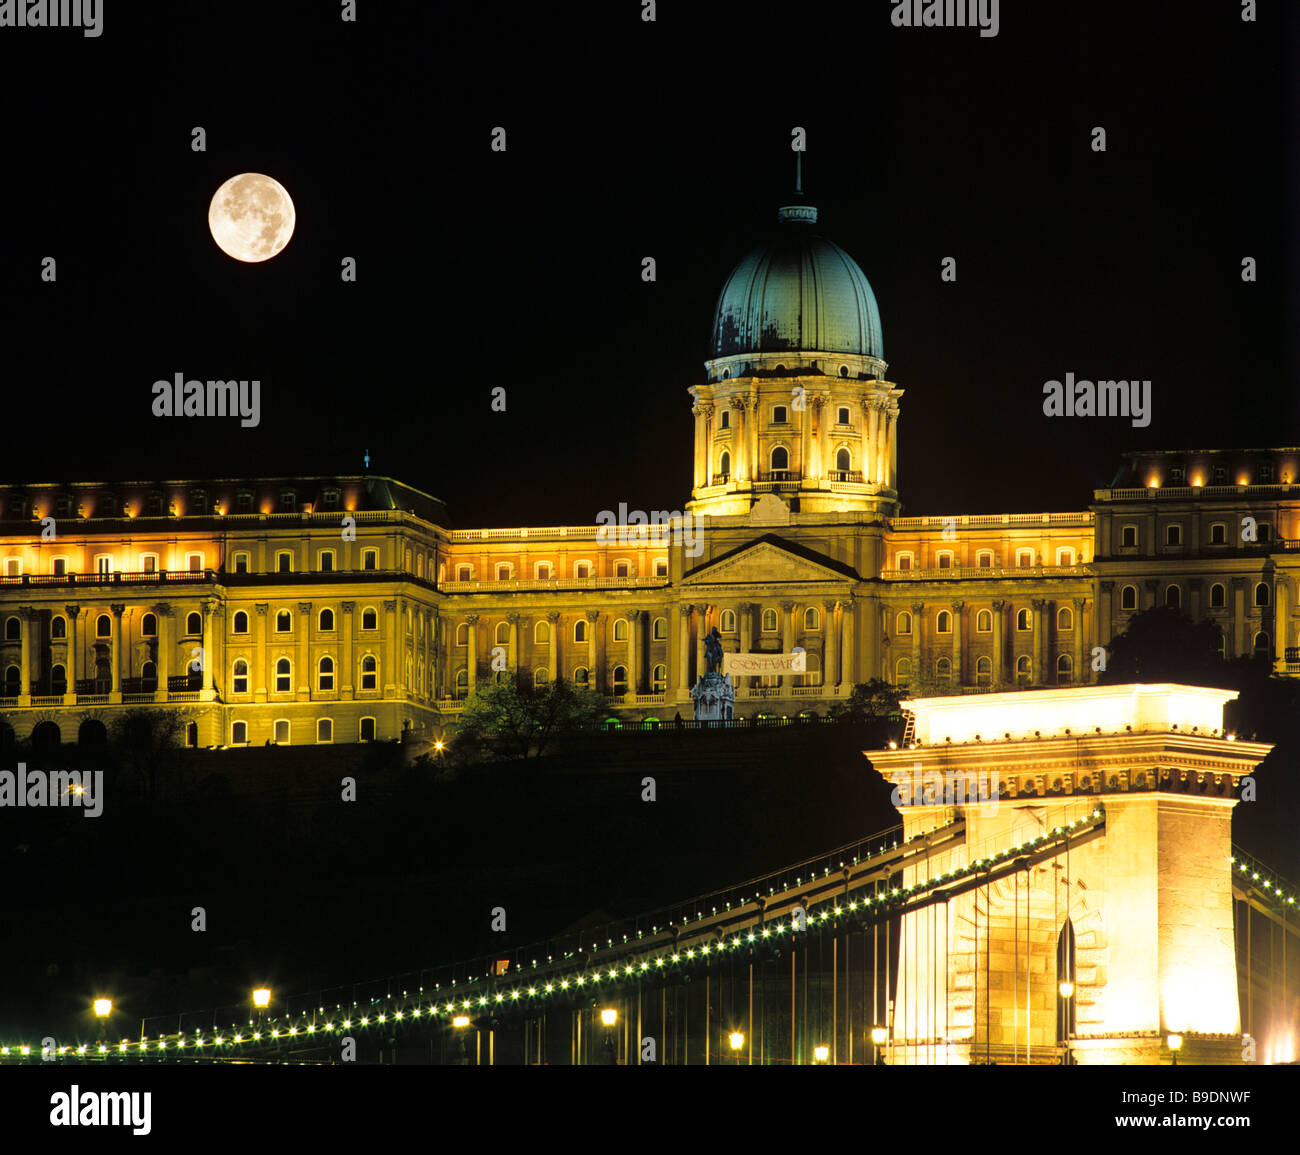 Castle Hill and palace at night, full moon, castle, suspension bridge, Danube, Budapest, Hungary (montage) Stock Photo